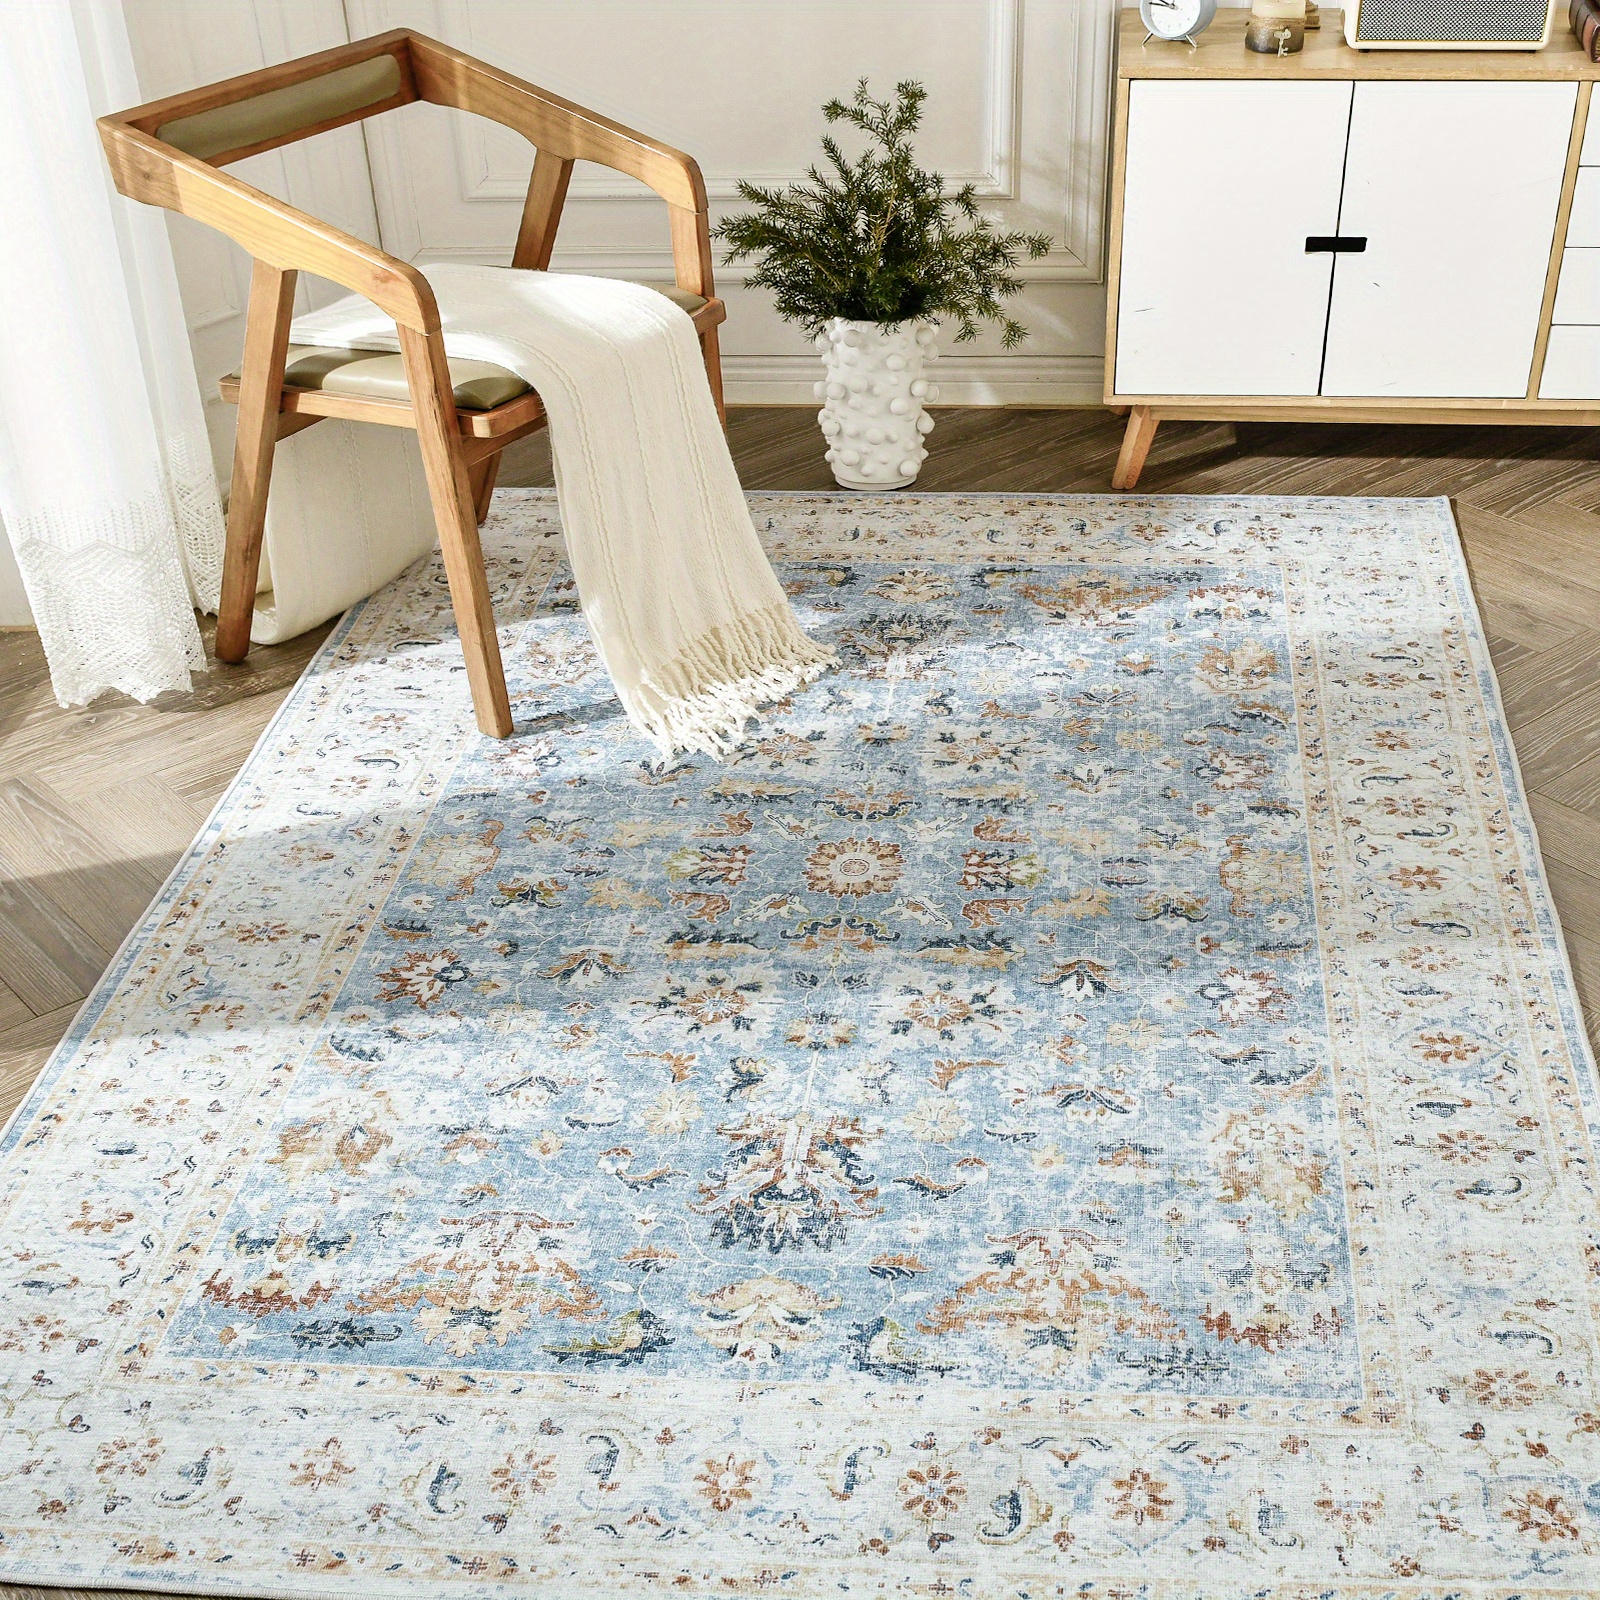 

Area Rug Machine Washable Rug - Entryway Doormat Floral Low Pile Boho Vintage Thin Throw Rug Non-slip Non-shedding Mat For Bathroom, Kitchen, Front Door